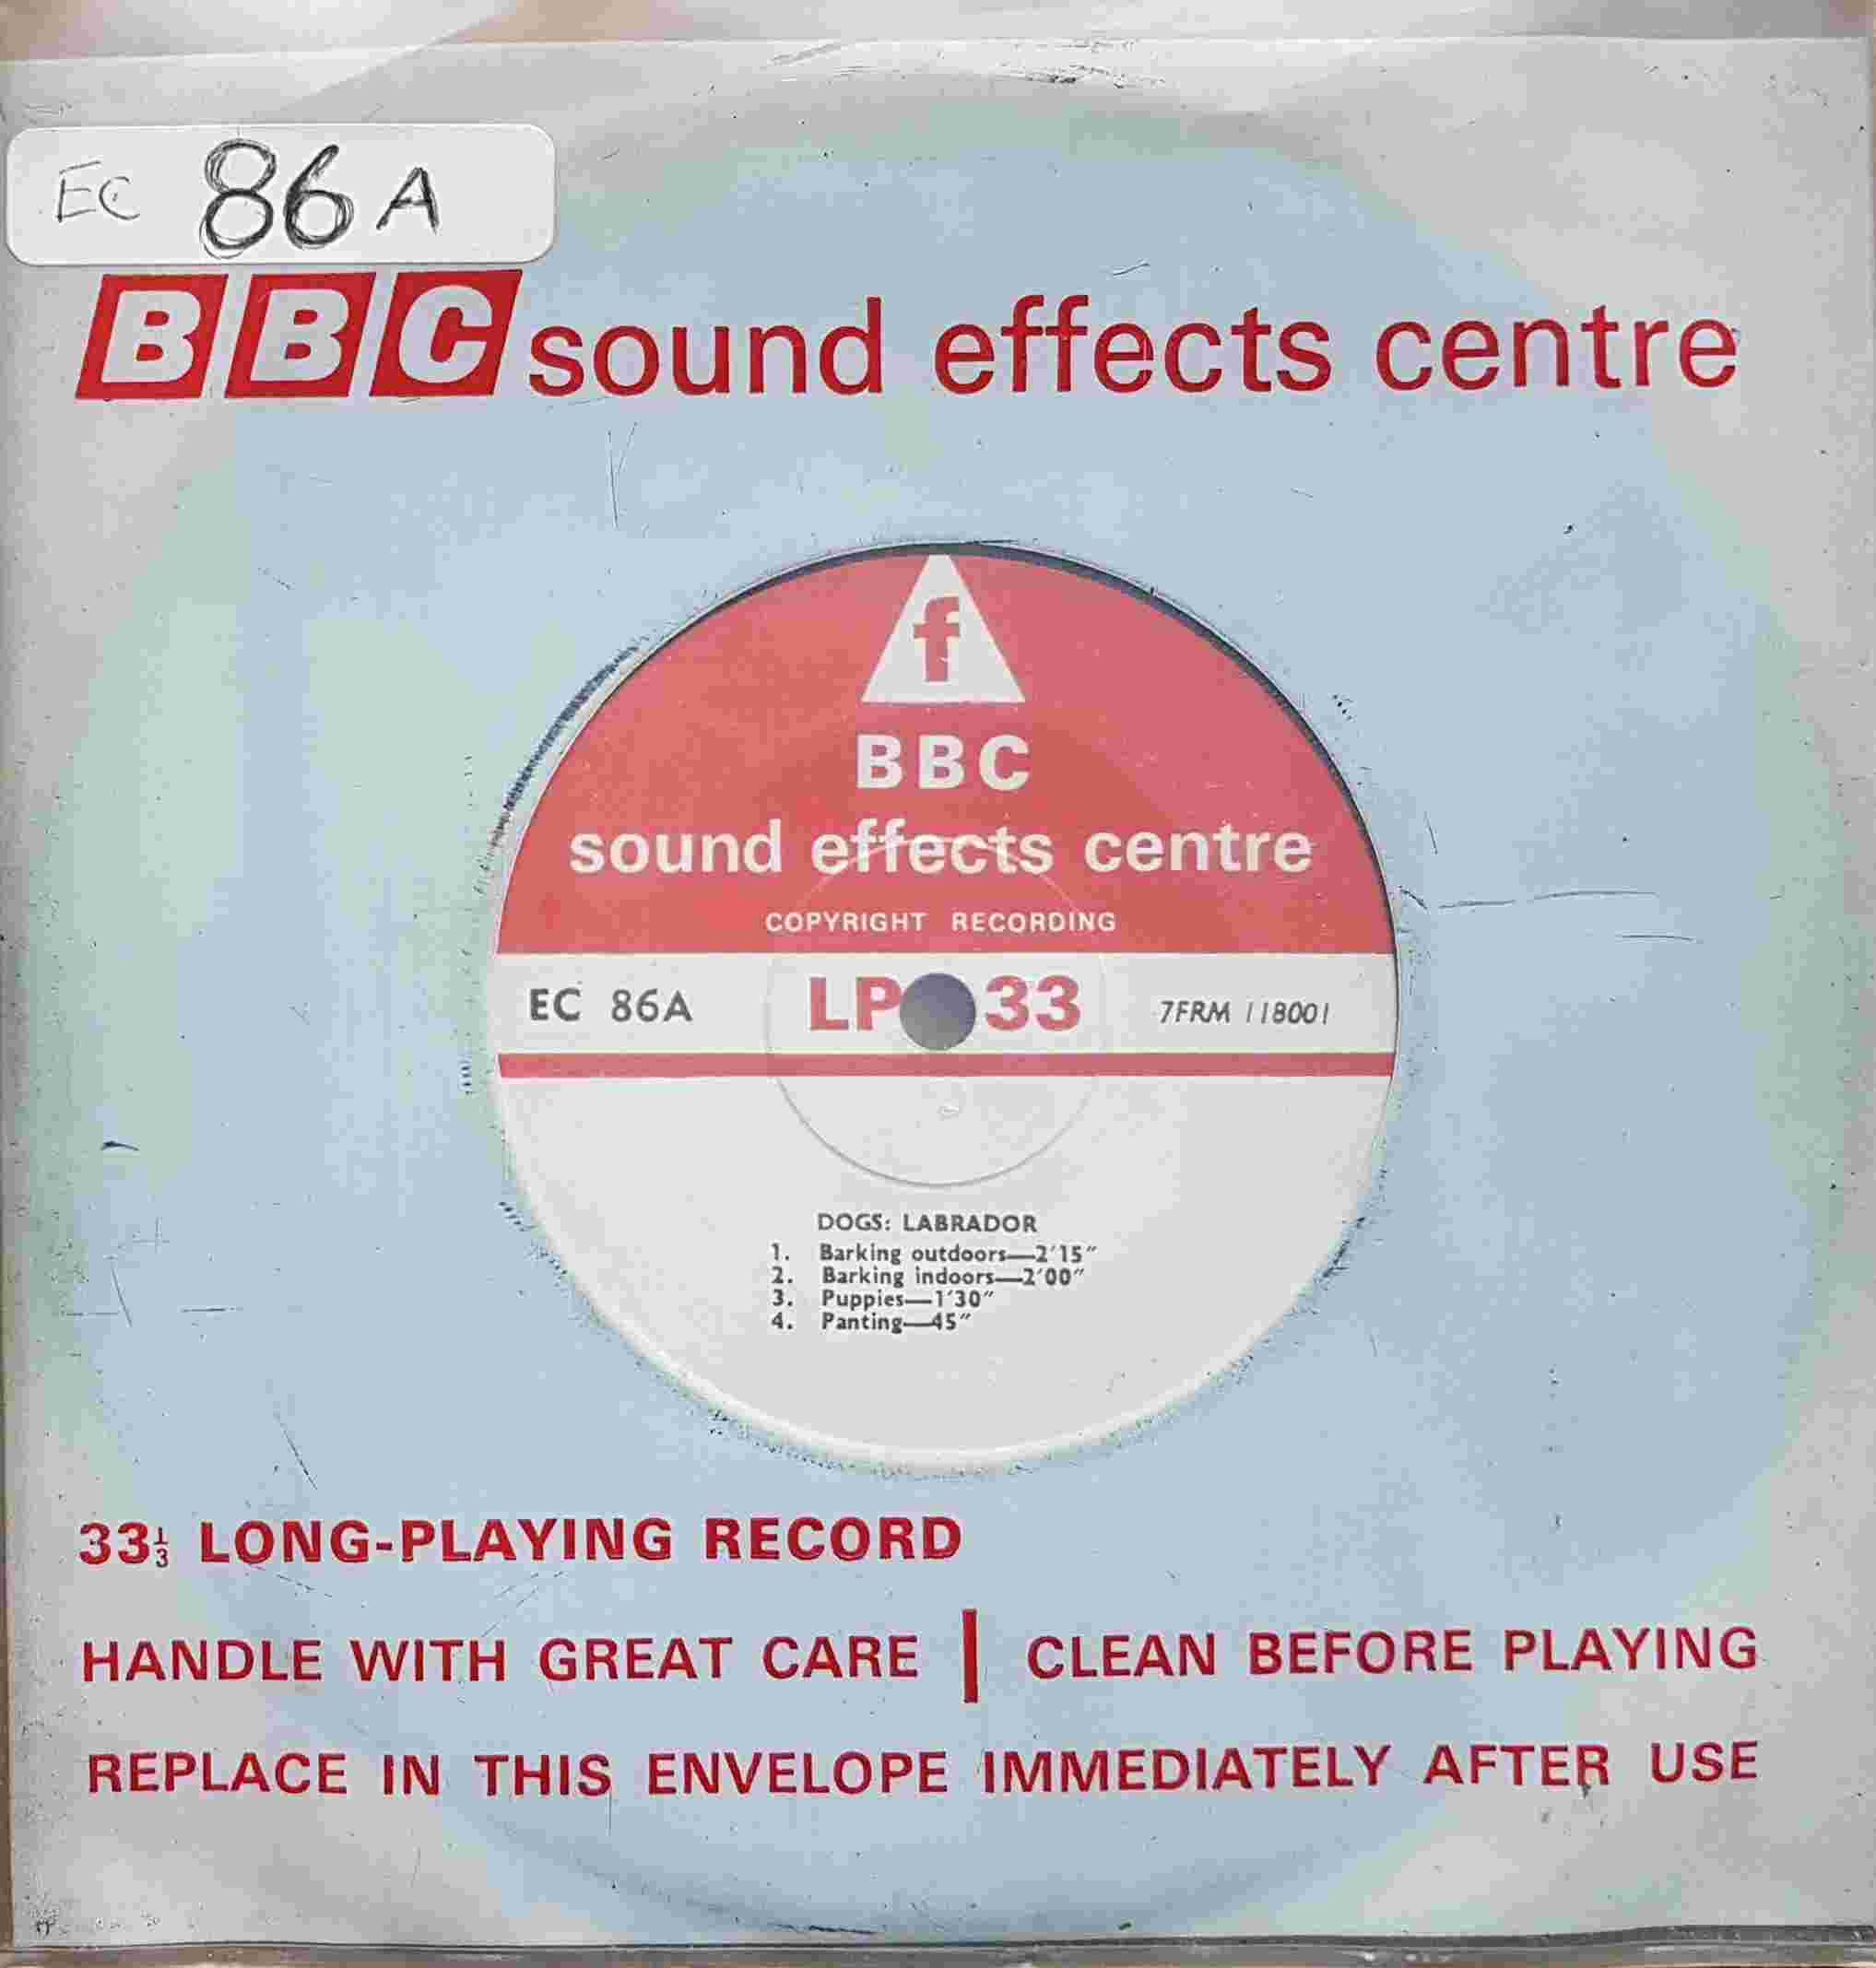 Picture of EC 86A Dogs by artist Not registered from the BBC records and Tapes library